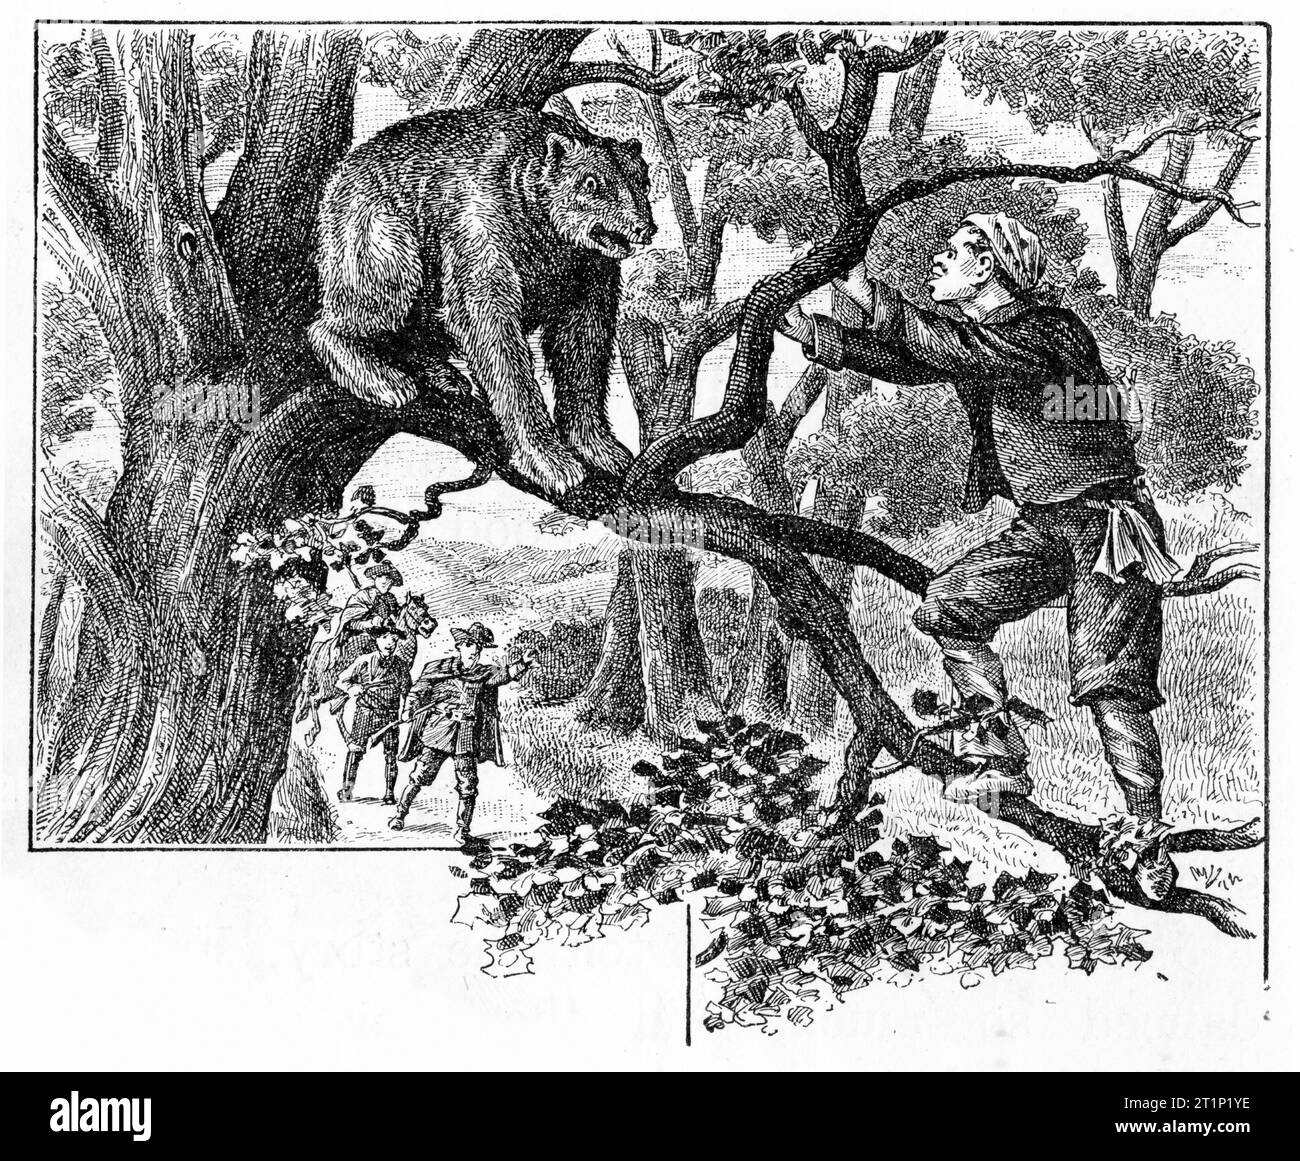 Engraving of a hunter confronting a bear in a tree, circa 1880 Stock Photo